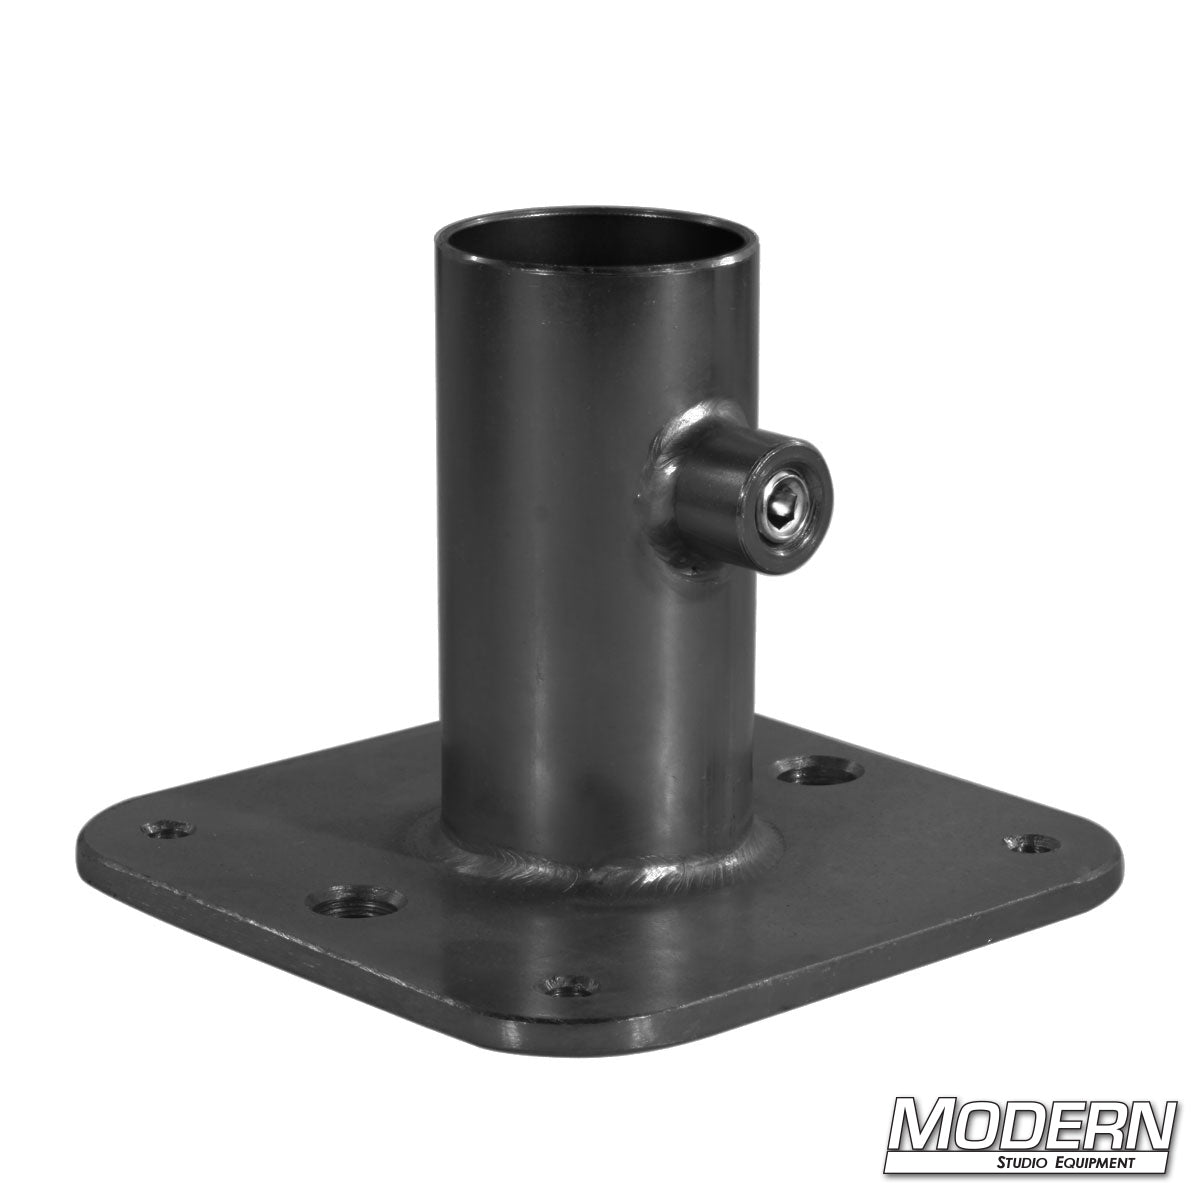 Pipe Flange Base for 1" Speed-Rail®